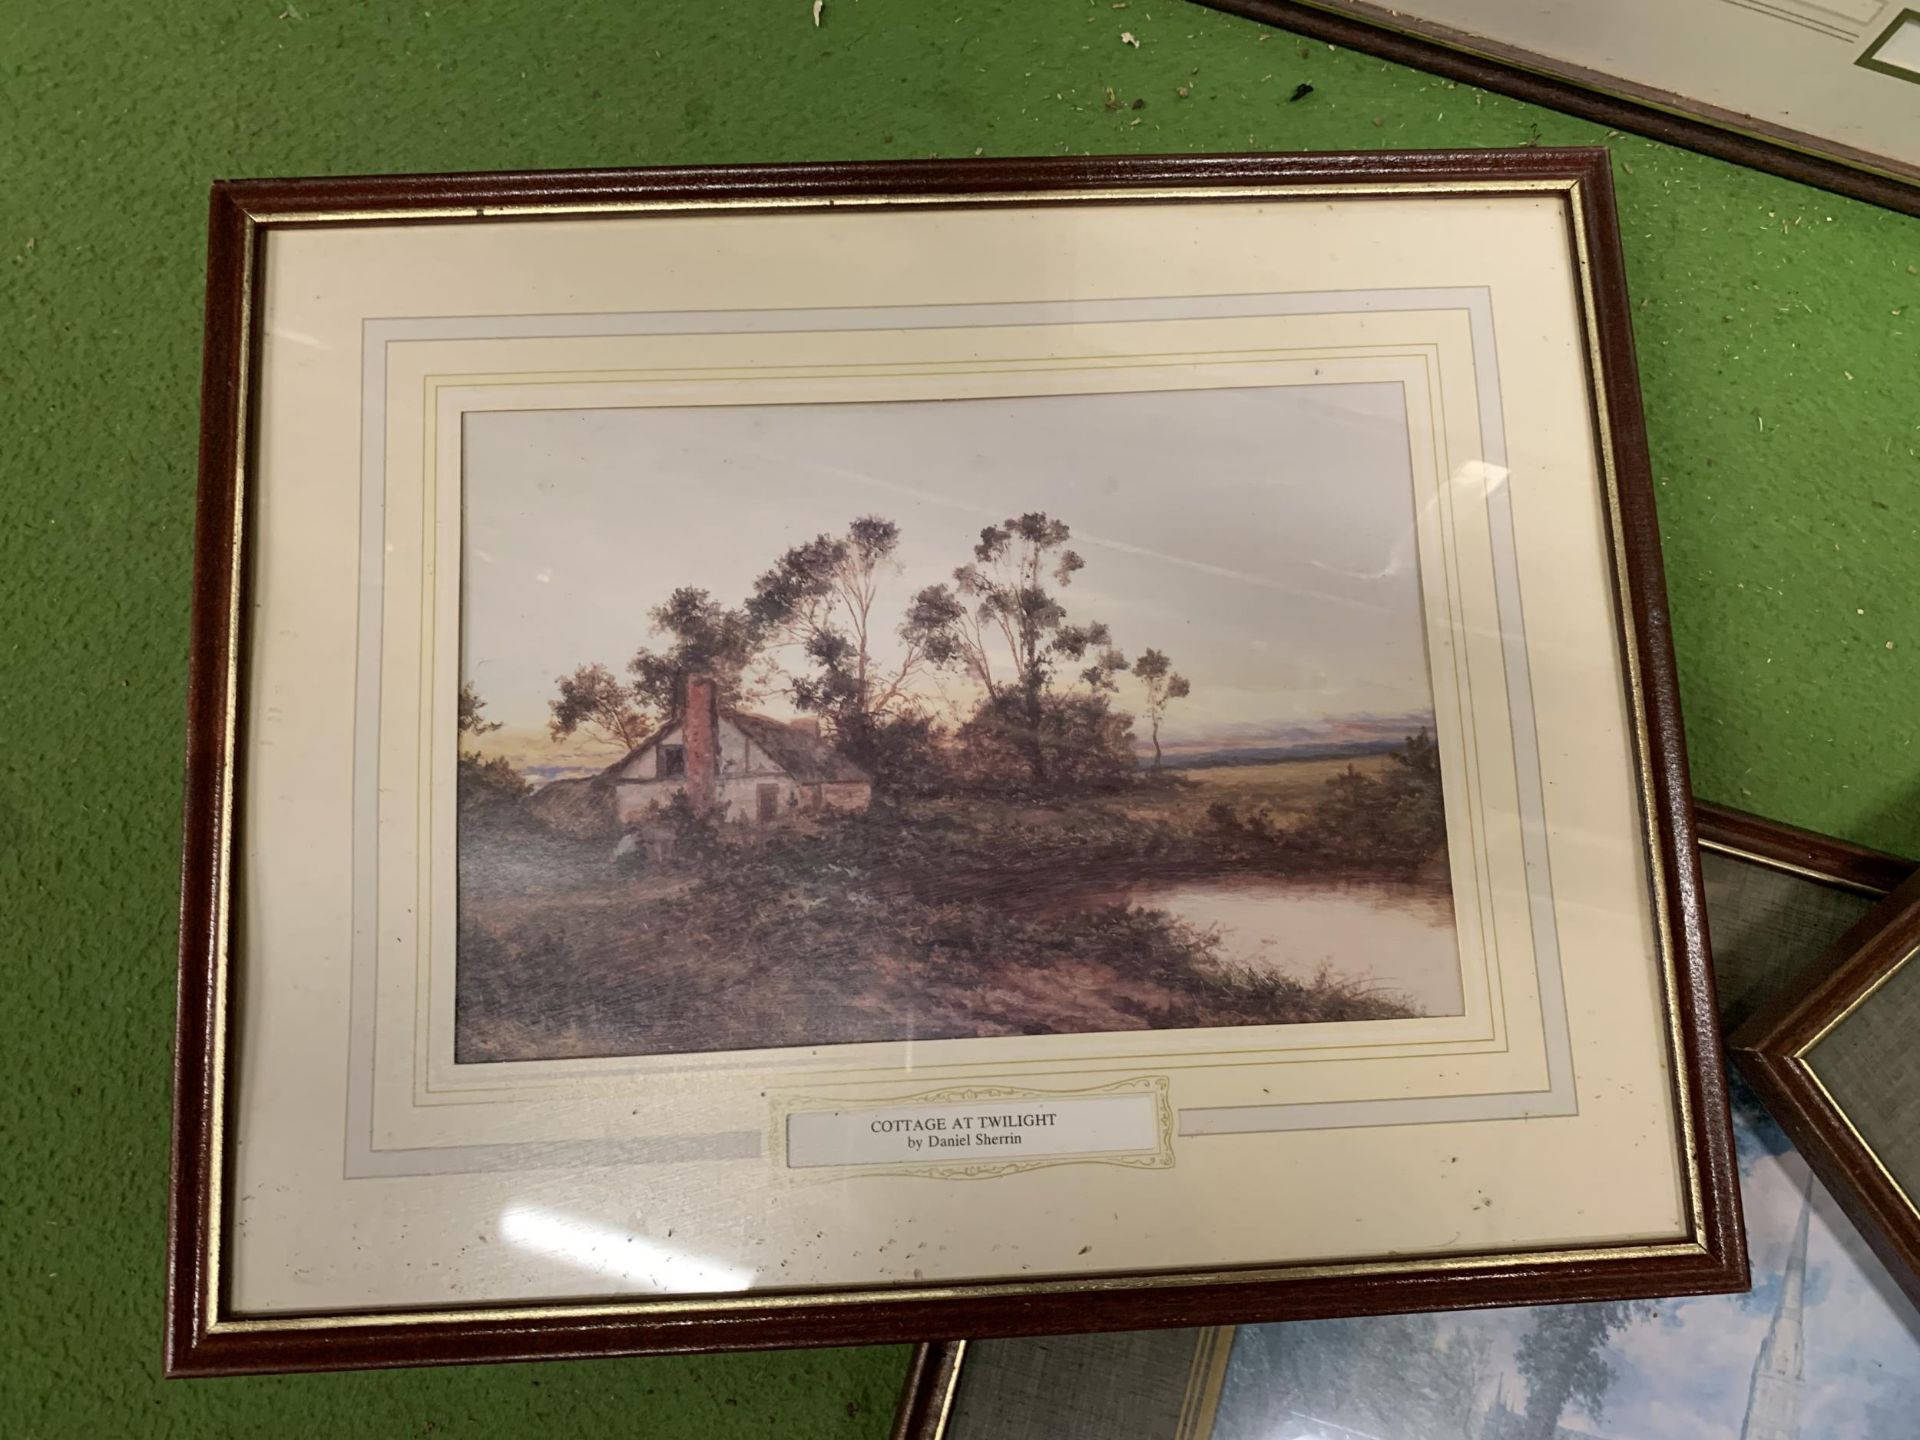 FOUR FRAMED PRINTS, TWO BY JOHN CONSTABLE, DANIEL SHERRIN AND JOSEPH FARQUHARSON - Image 3 of 5